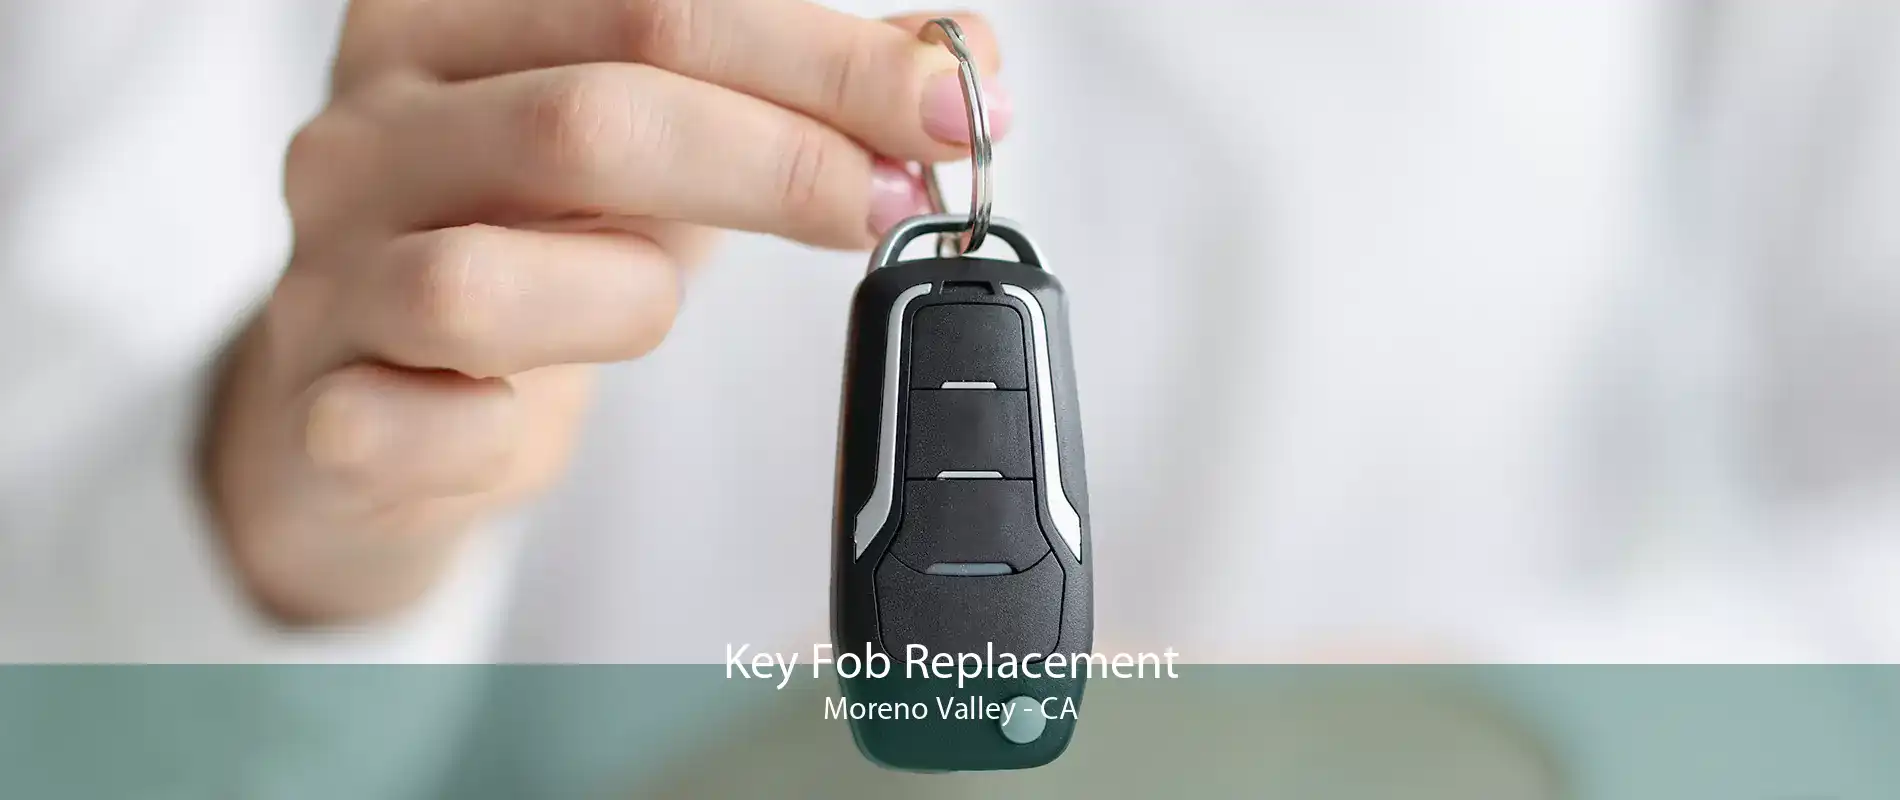 Key Fob Replacement Moreno Valley - CA